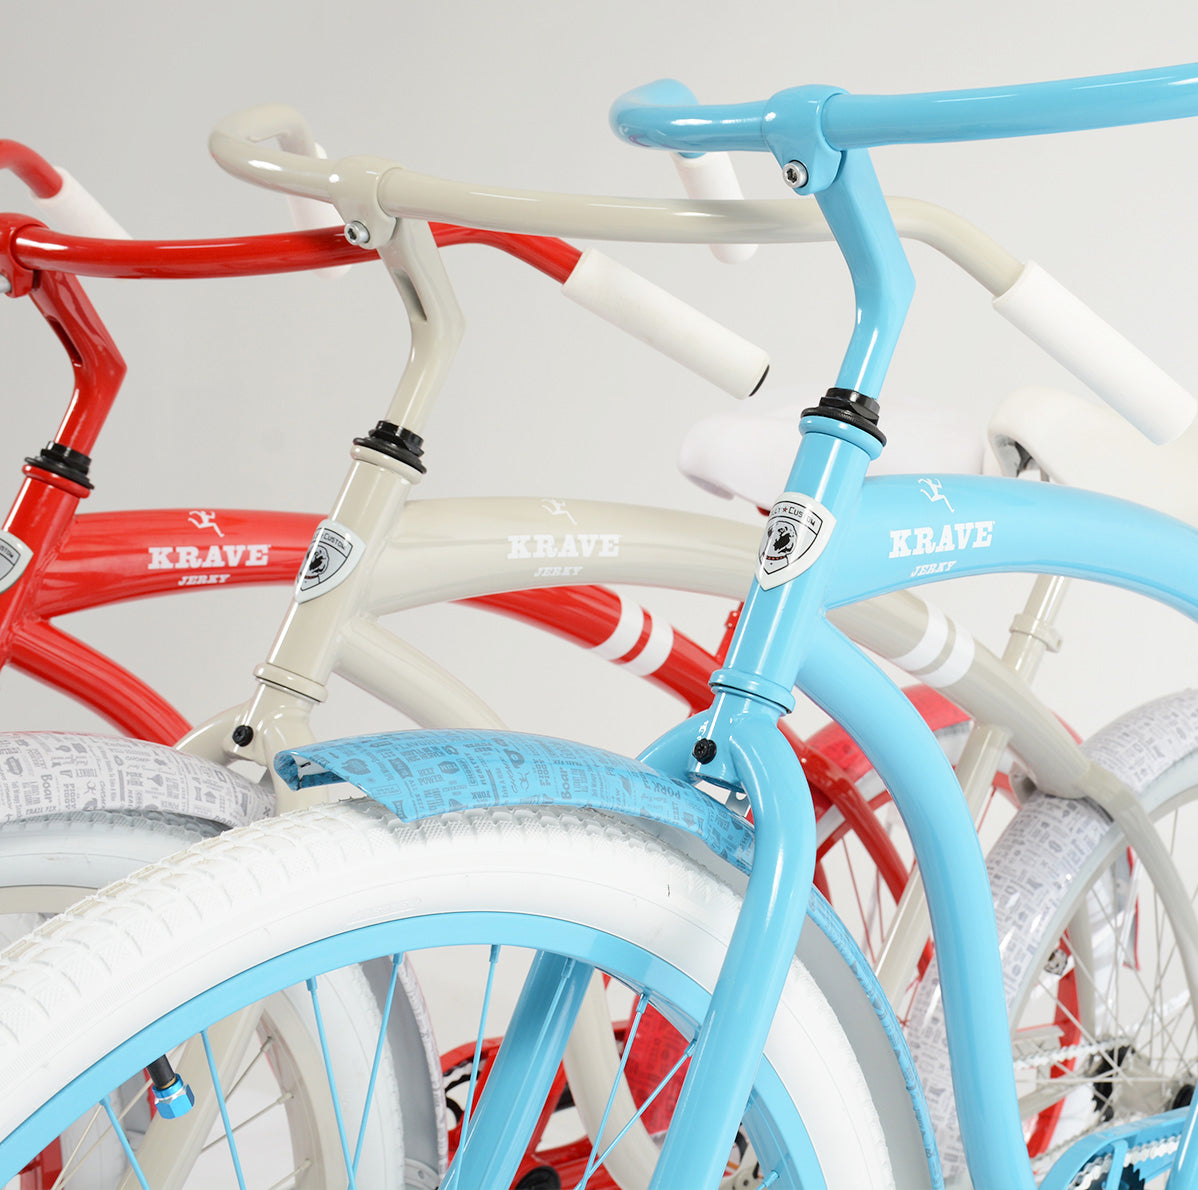 A finished fleet of red, creme, and light blue Villy Krave bikes for Signature Branding